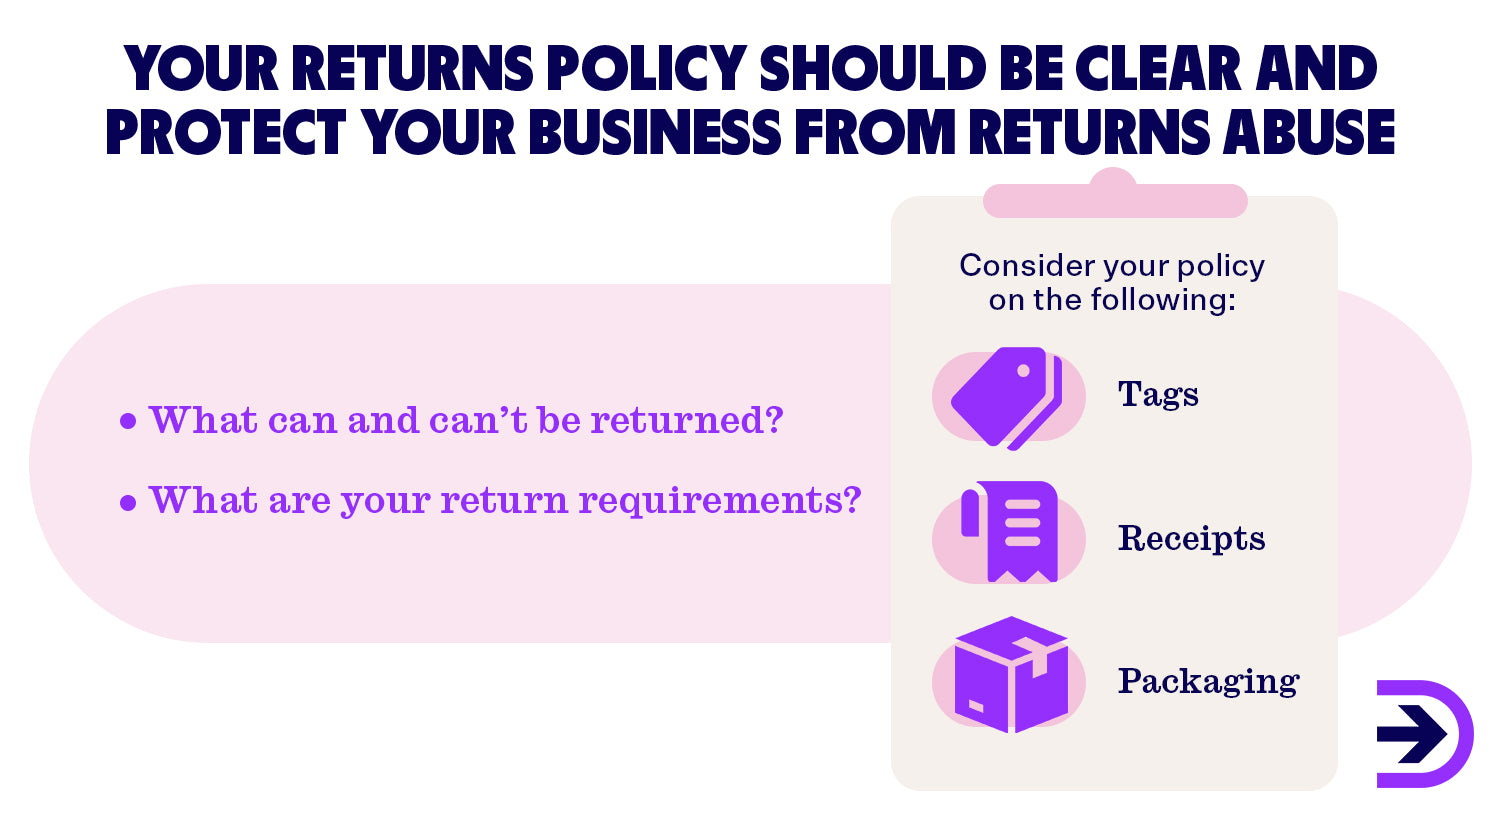 Returns abuse is a form of policy abuse which has become a multi-million dollar problem.